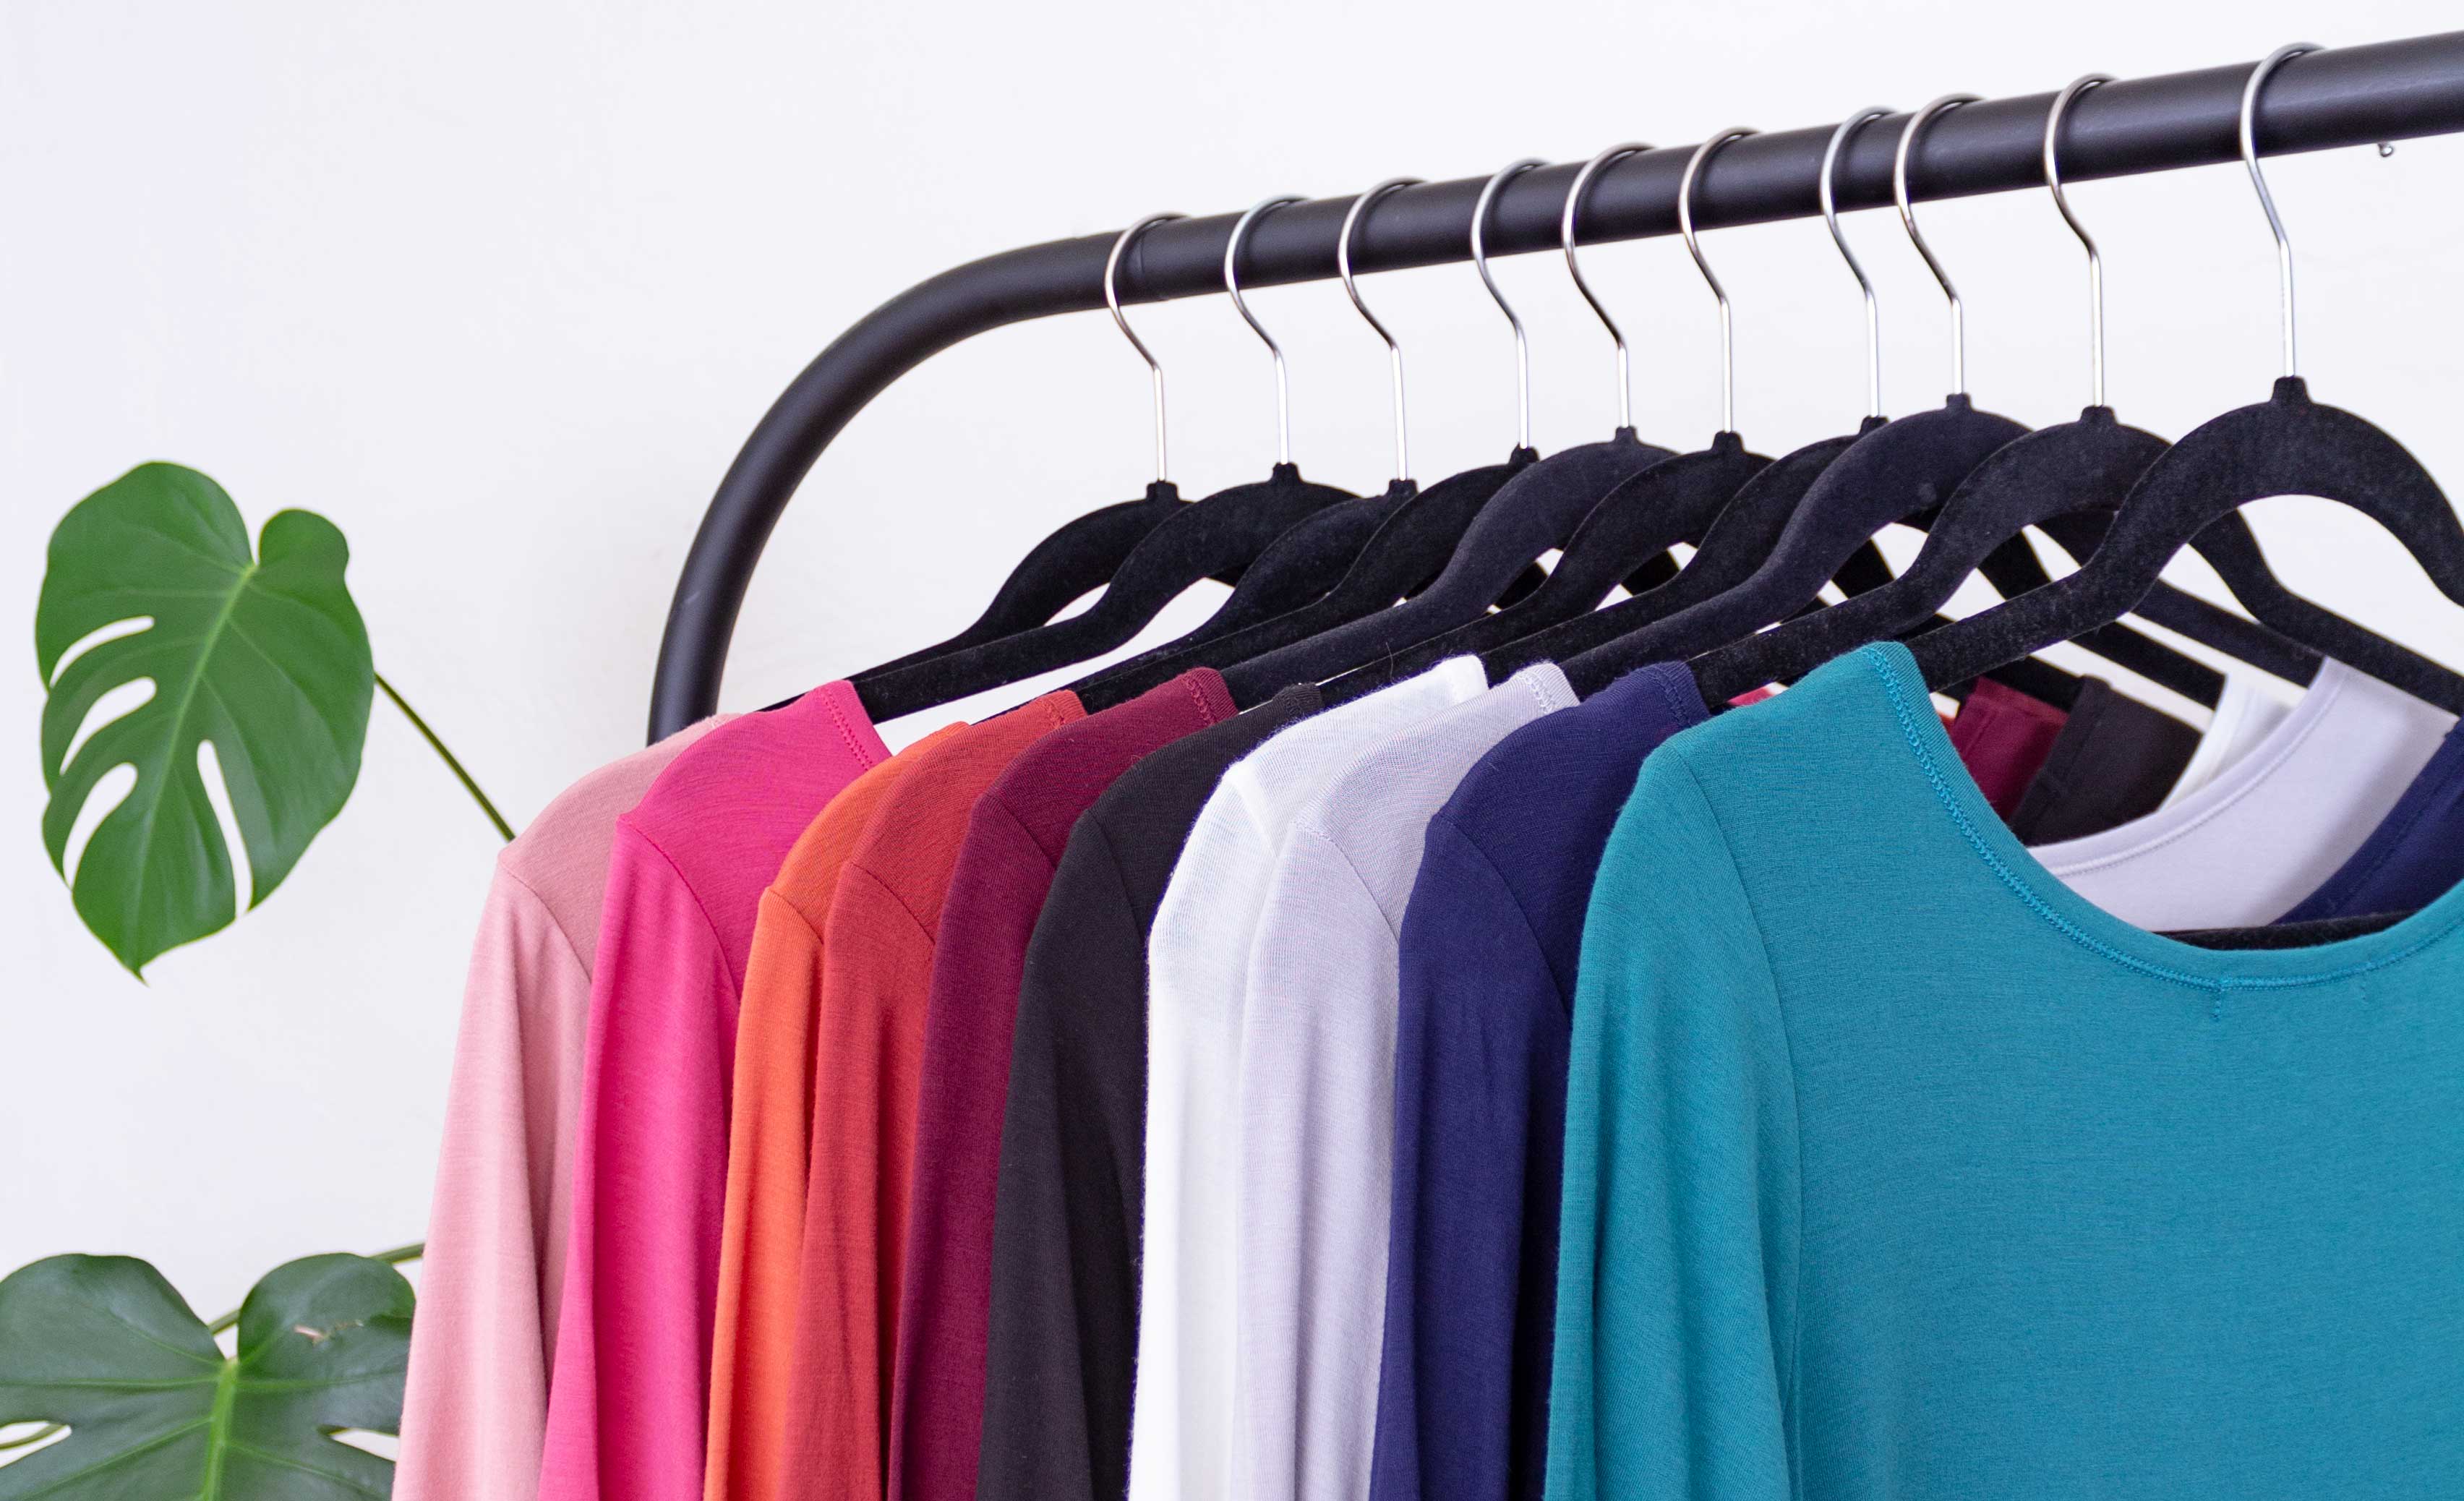 Several brightly colored YALA shirts hanging on a clothing rack.